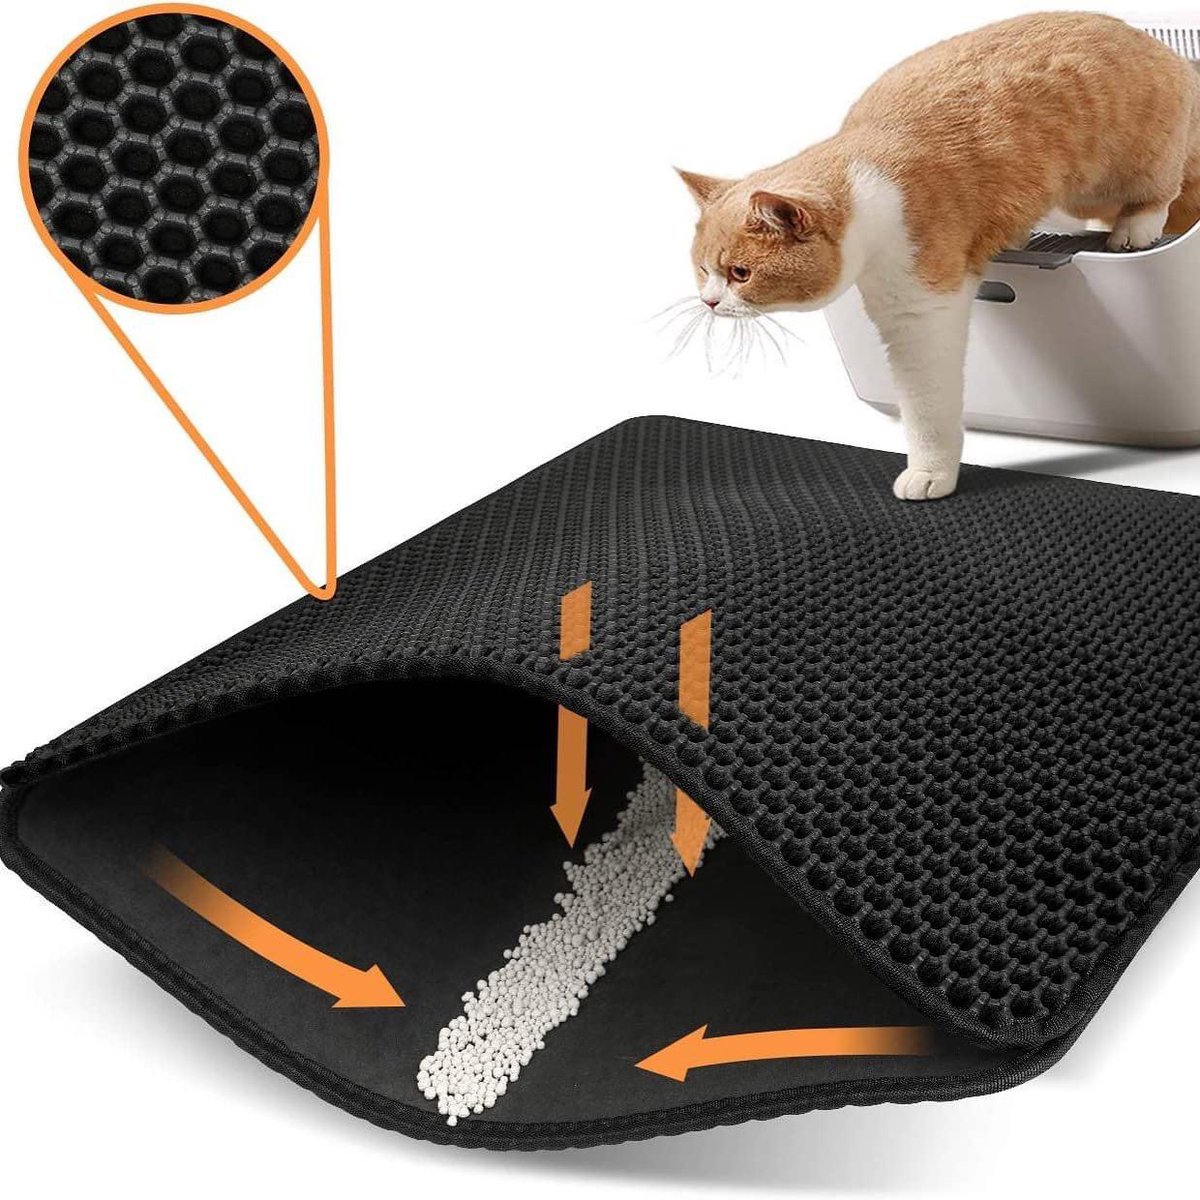 Say goodbye to a messy litter box! Our double-layer EVA foam litter trapper traps all the sand; then simply pour the sand back into the litter box using the pocket. A must-have for any cat owner! 🐱

#beyondcatstore #littermat #catproducts #cat #pet #petessentials #kitten